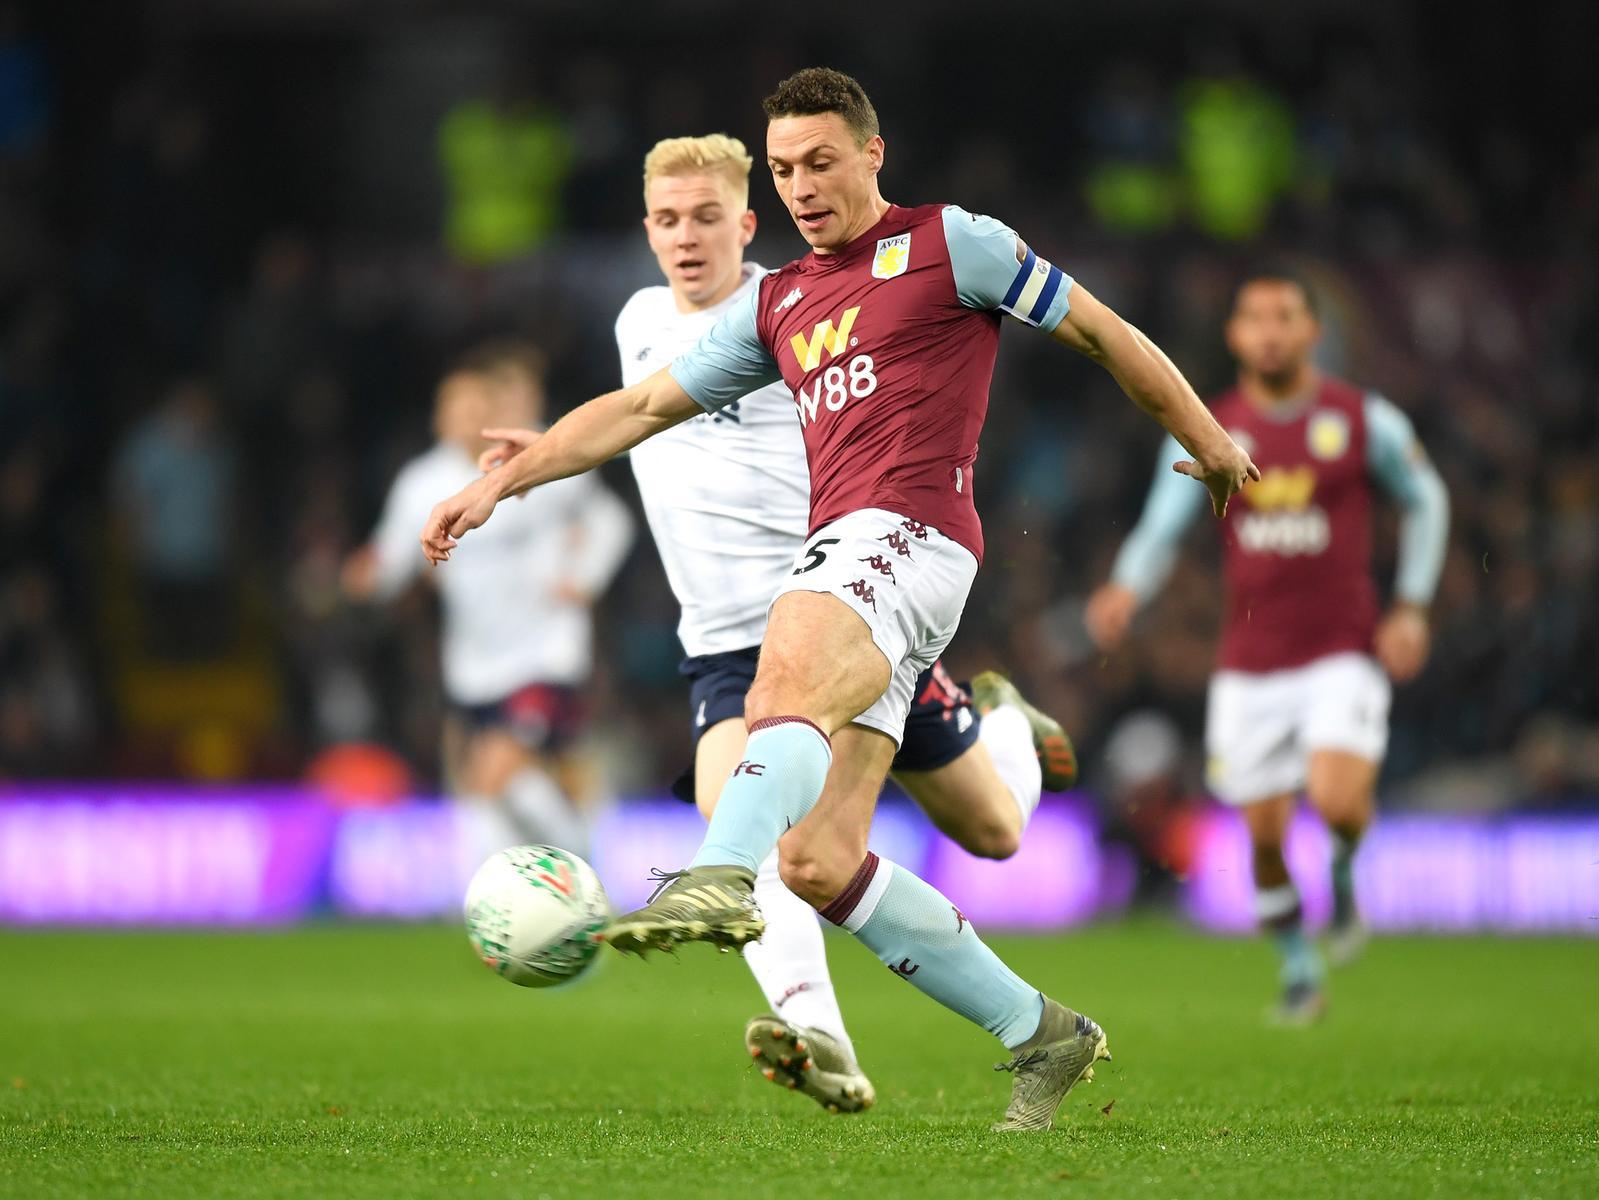 New Stoke City man James Chester could make his debut in the clash with Charlton Athletic at the Bet365 Stadium. (Various)